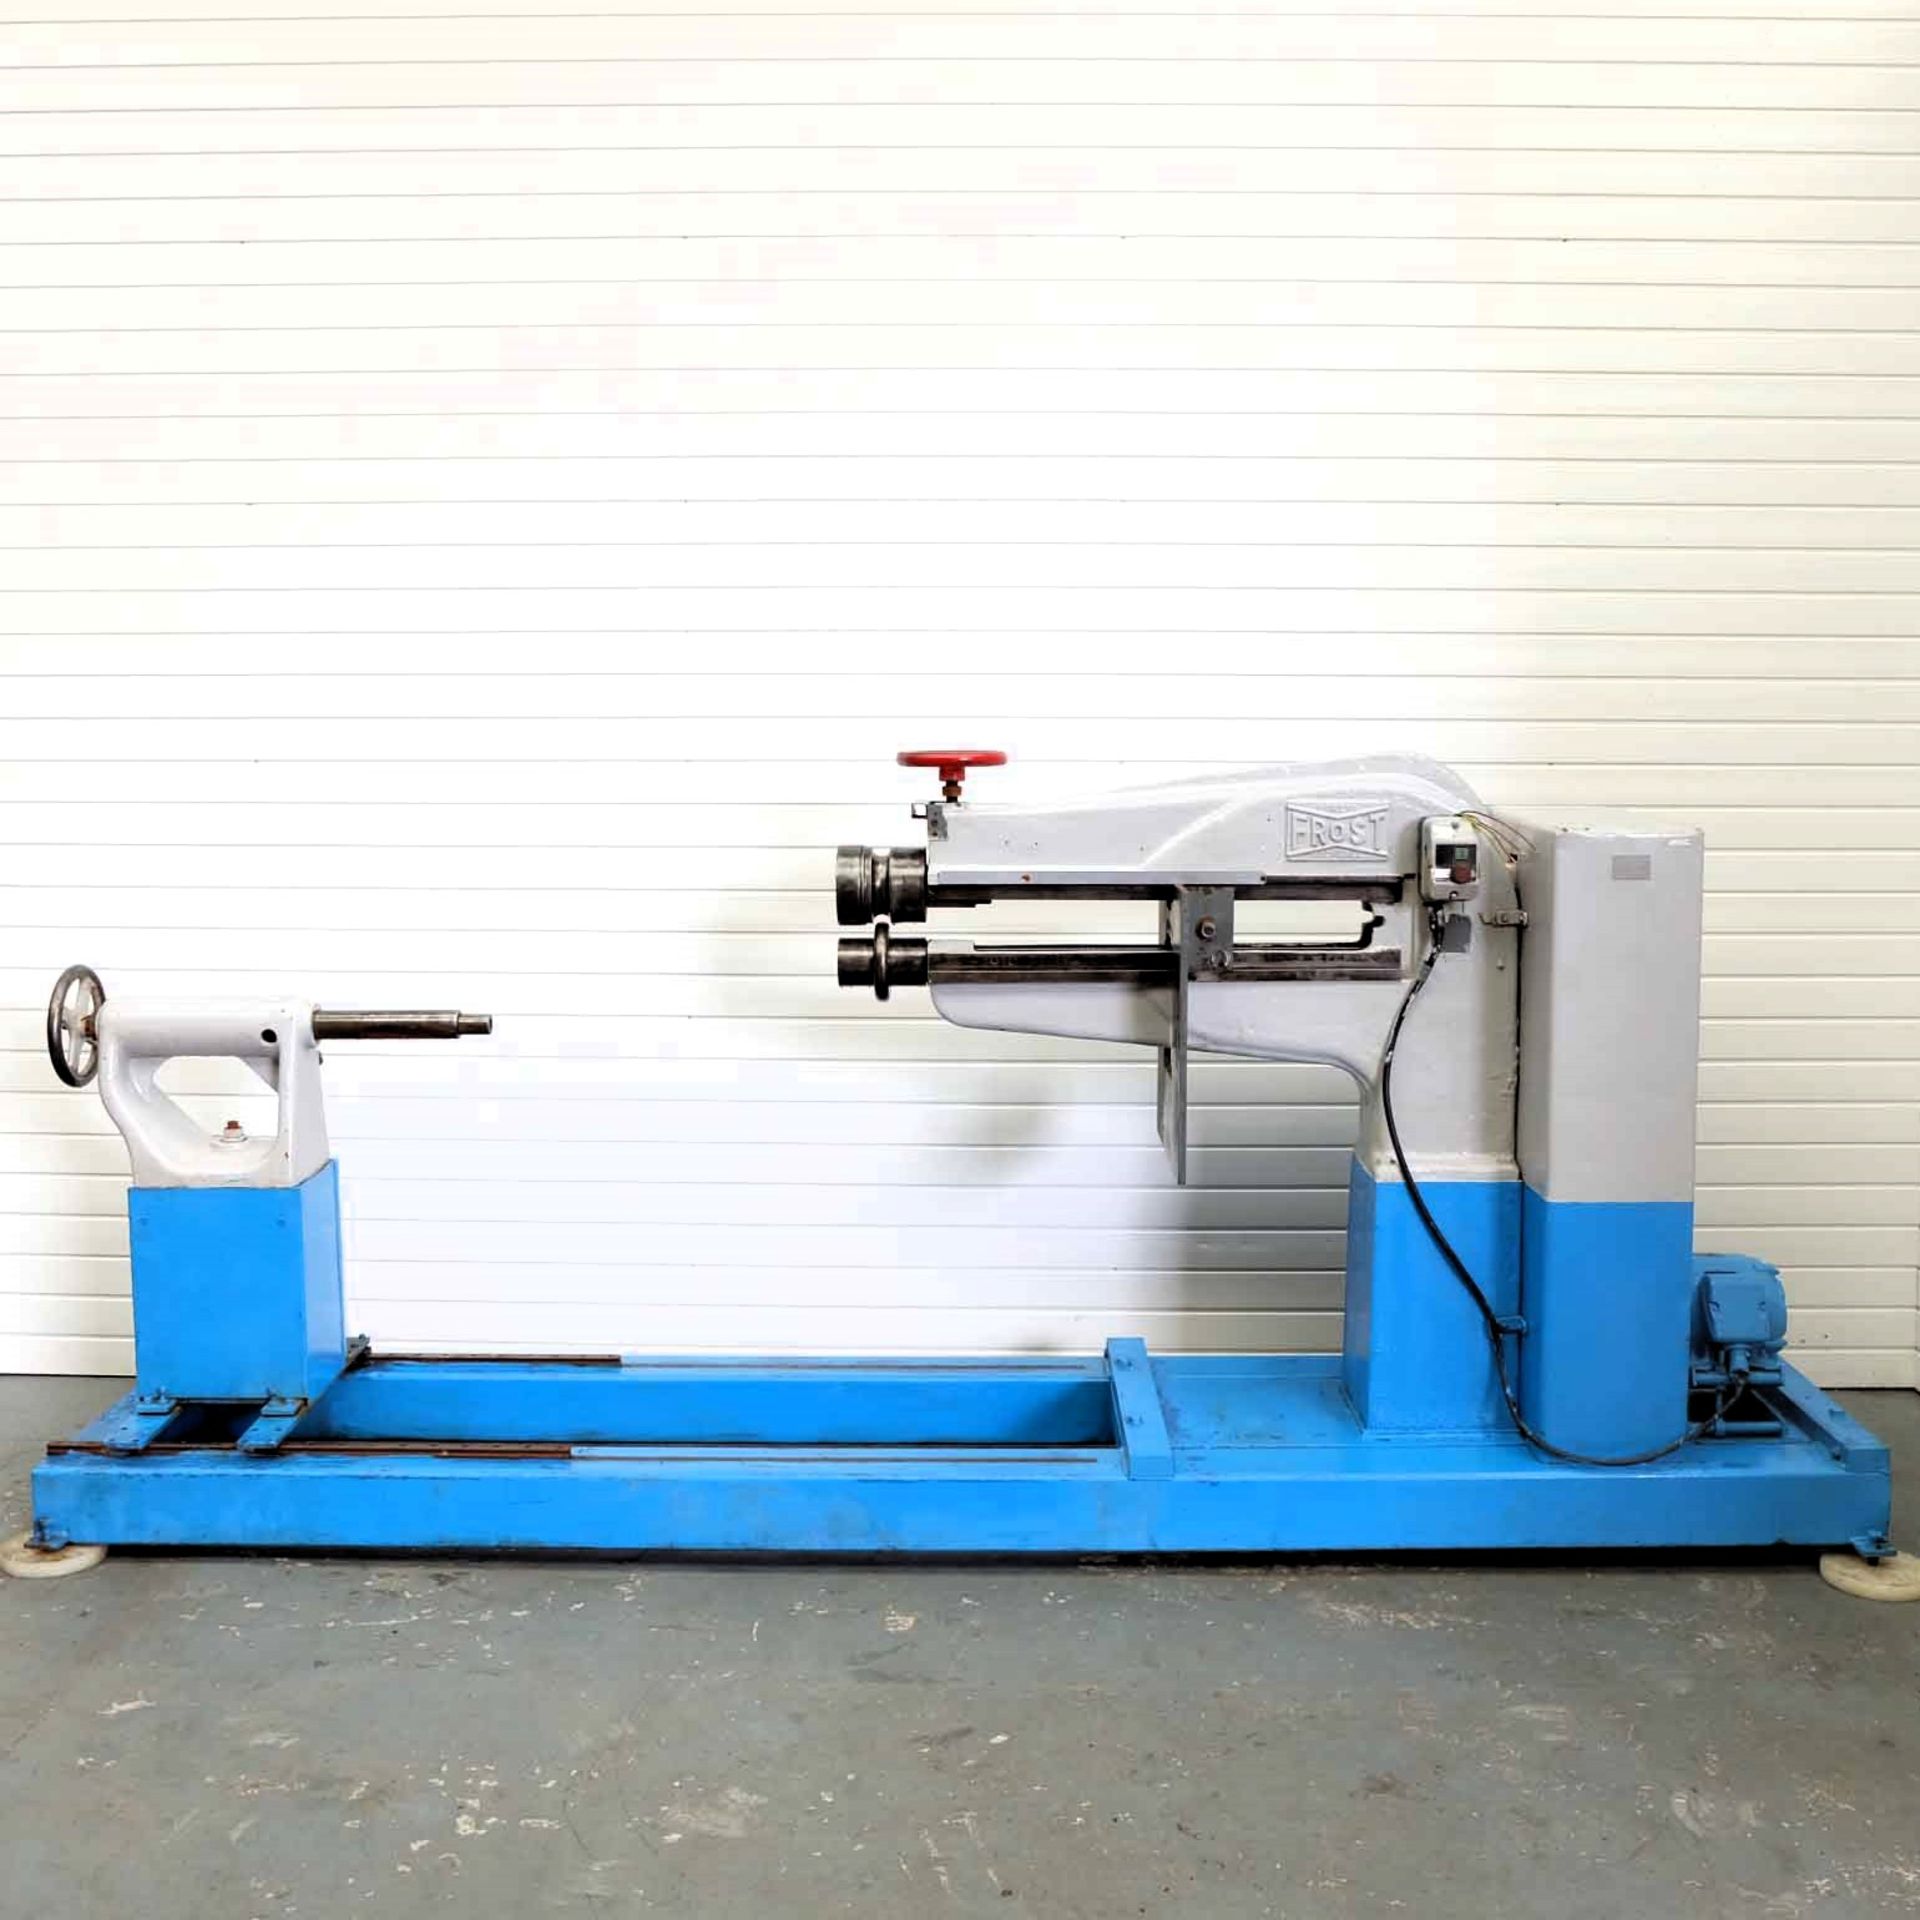 Frost Swaging Machine. Throat Depth 36" Approx. With Tailstock. Motor 3 Phase, 1 HP.